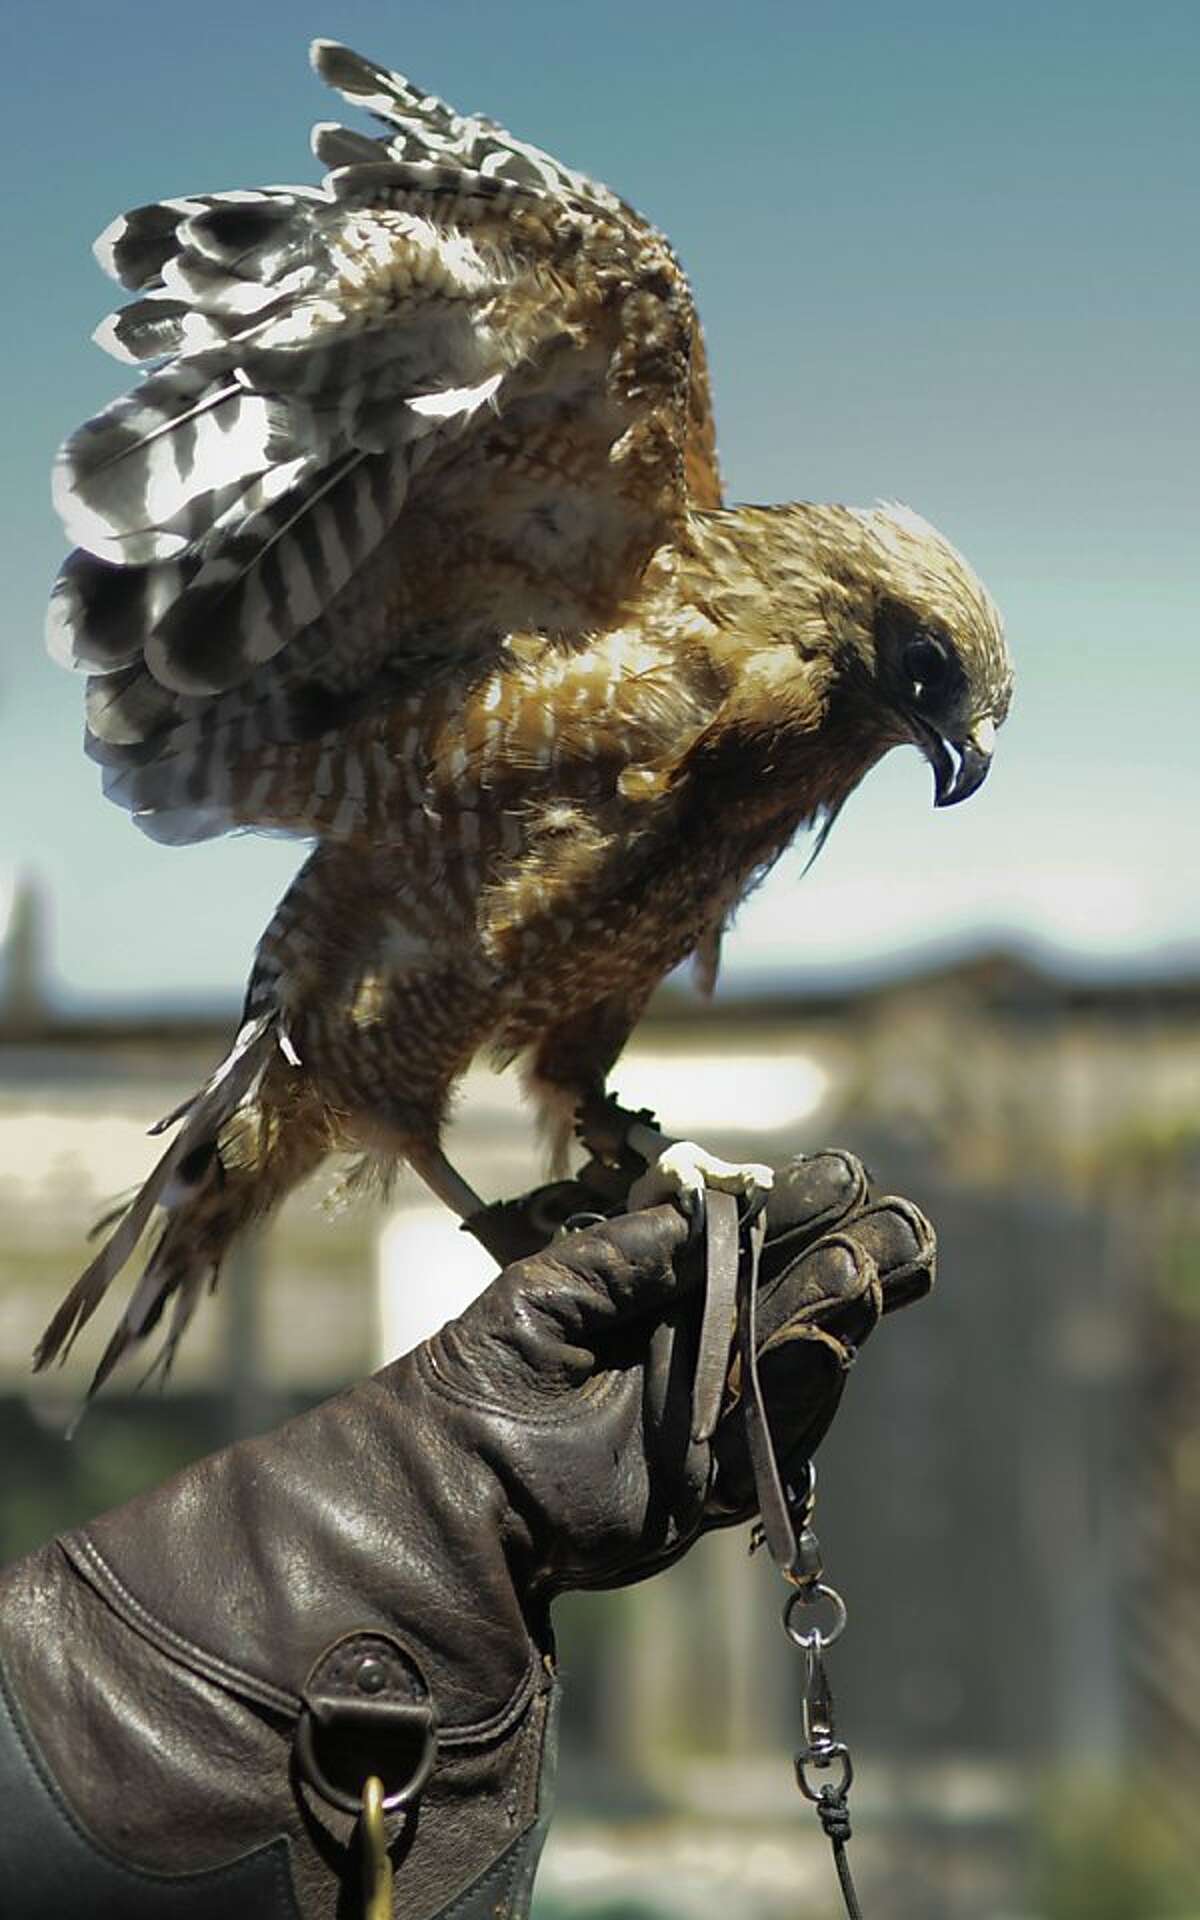 Red shouldered hawk, Phoenix, is photographed at WildCare on Thursday, Aug 2, 2012 in San Rafael, Calif.